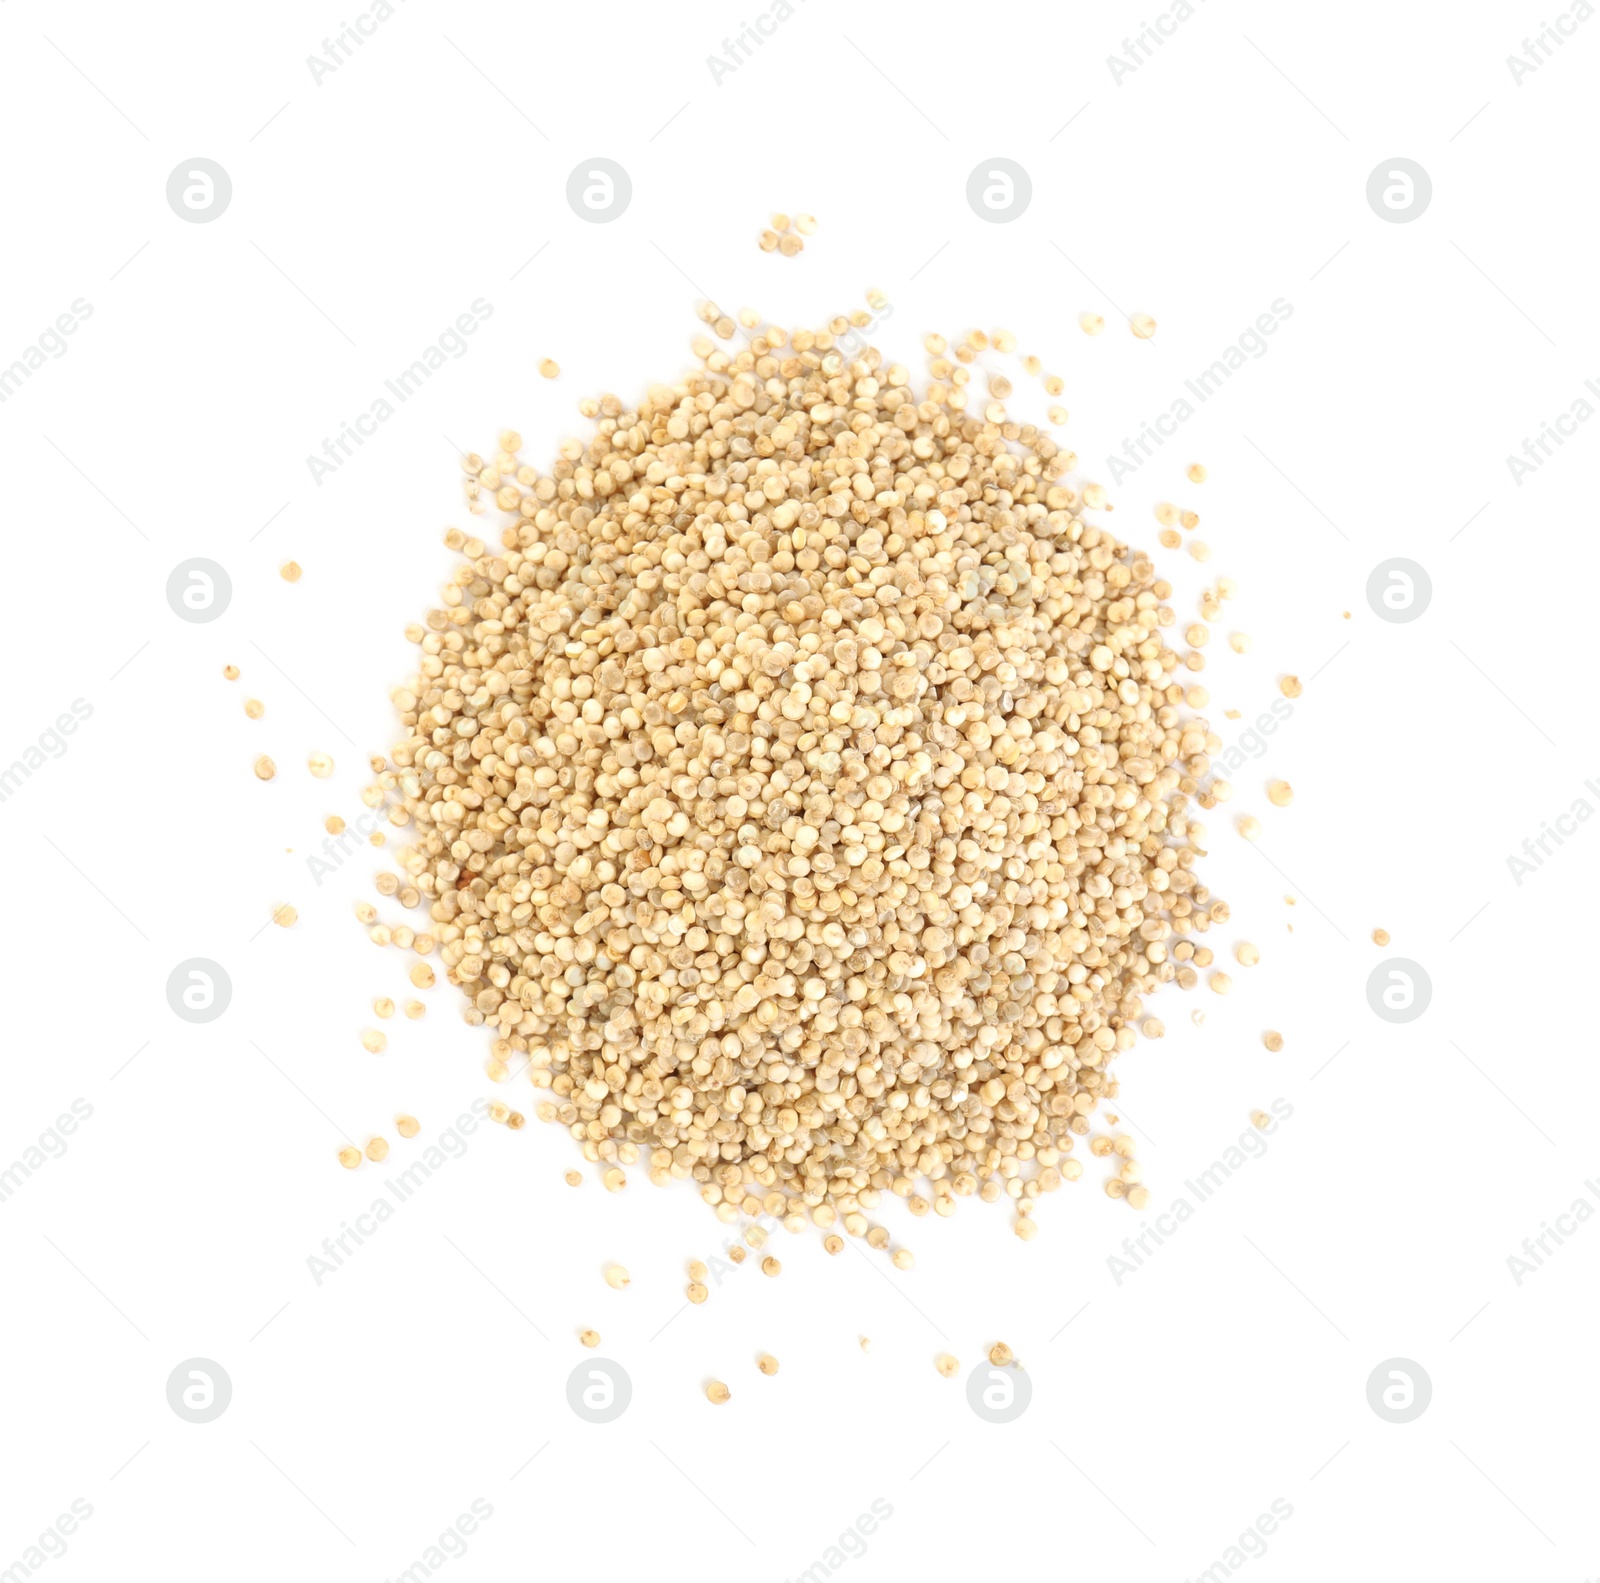 Photo of Pile of quinoa on white background, top view